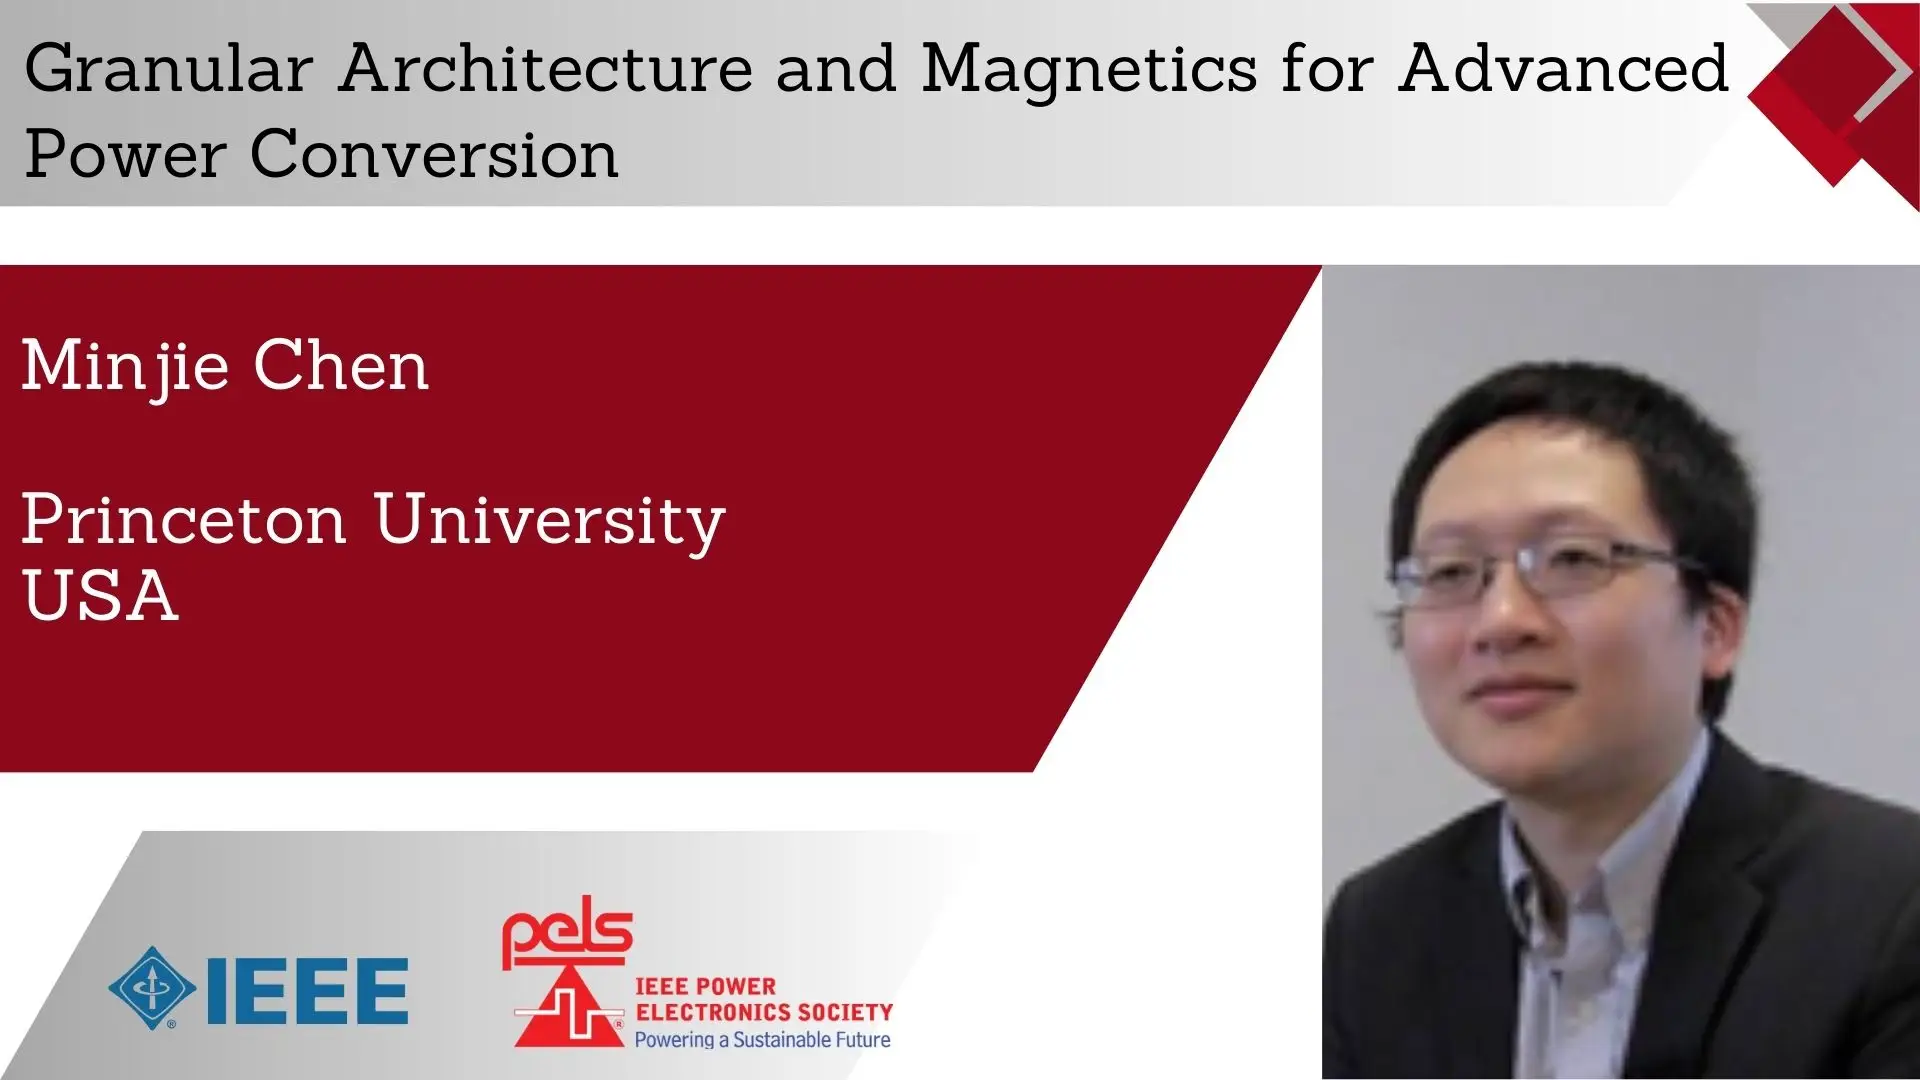 Granular Architecture and Magnetics for Advanced Power Conversion-Video